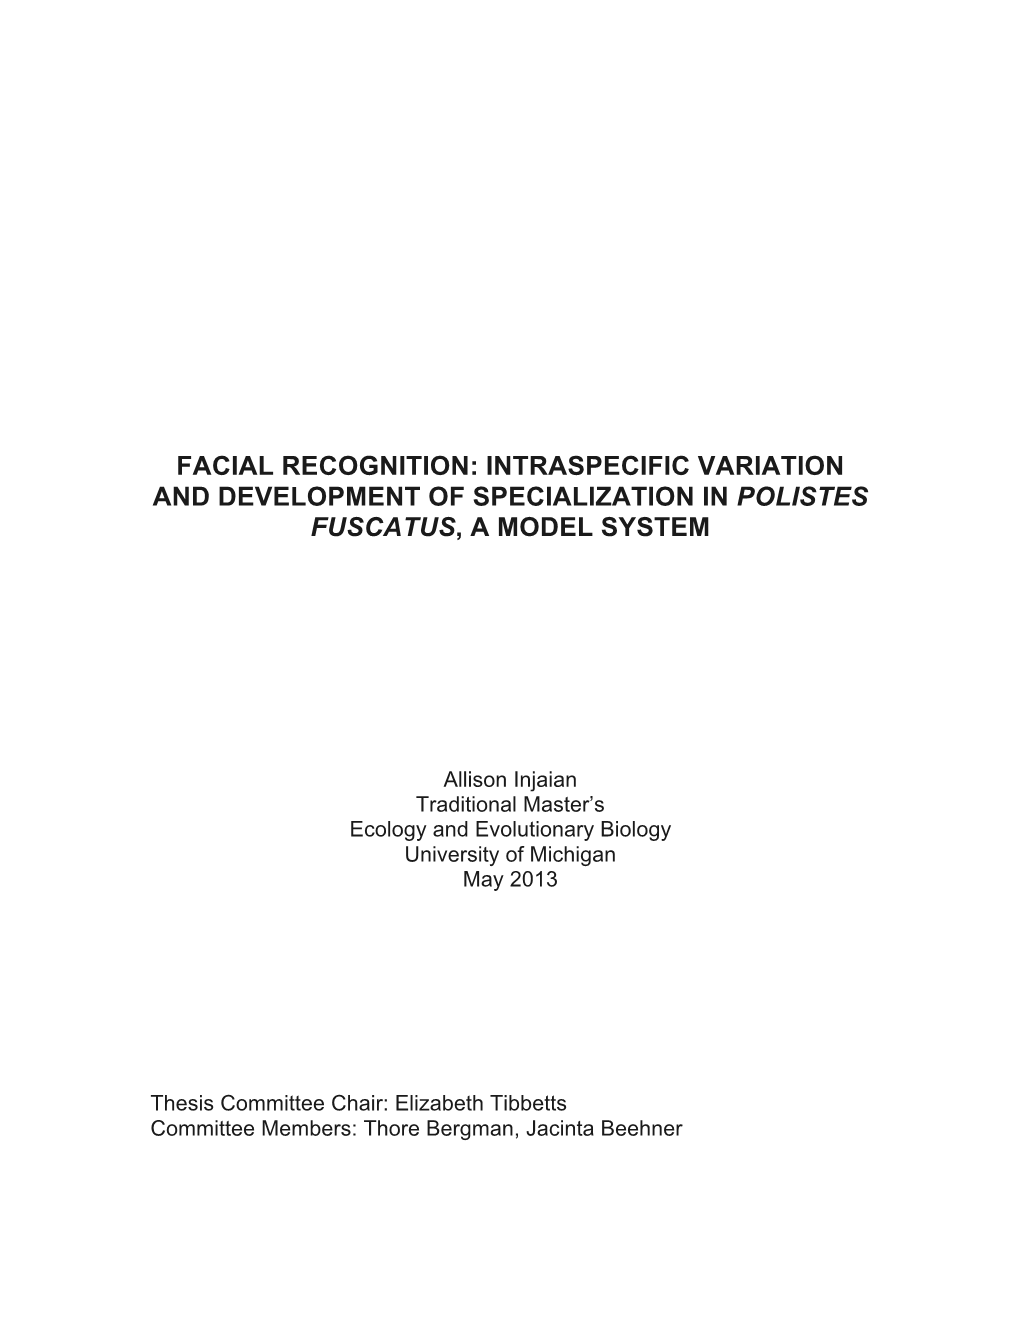 Intraspecific Variation and Development of Specialization in Polistes Fuscatus, a Model System